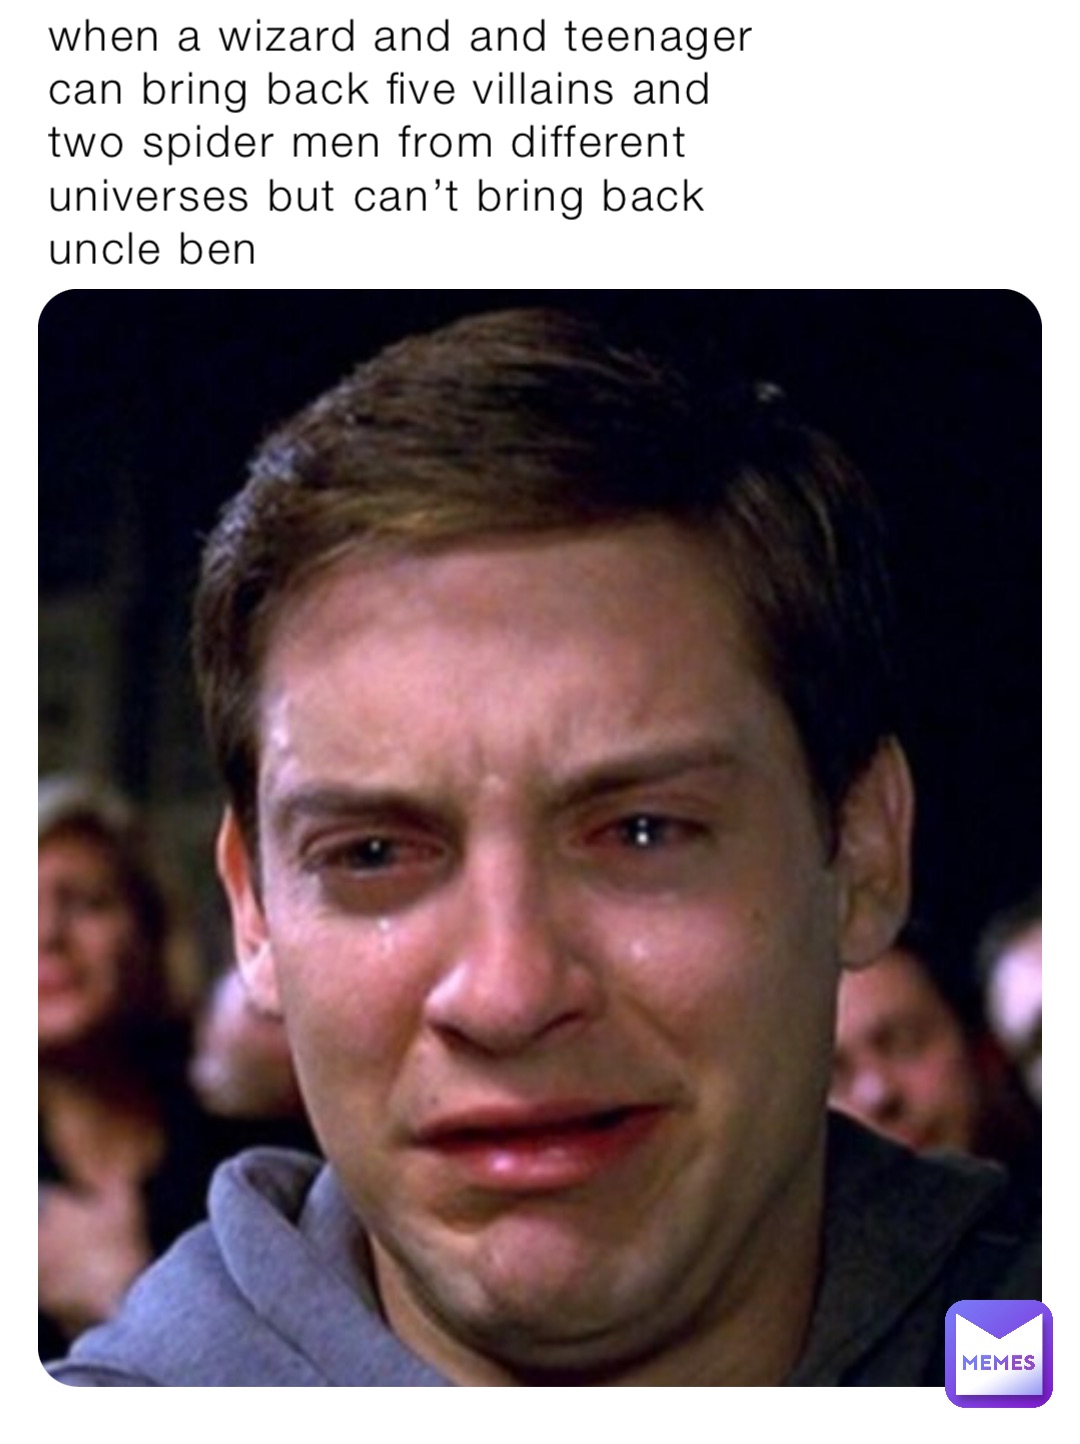 When a wizard and and teenager can bring back five villains and two spider men from different universes but can’t bring back uncle Ben